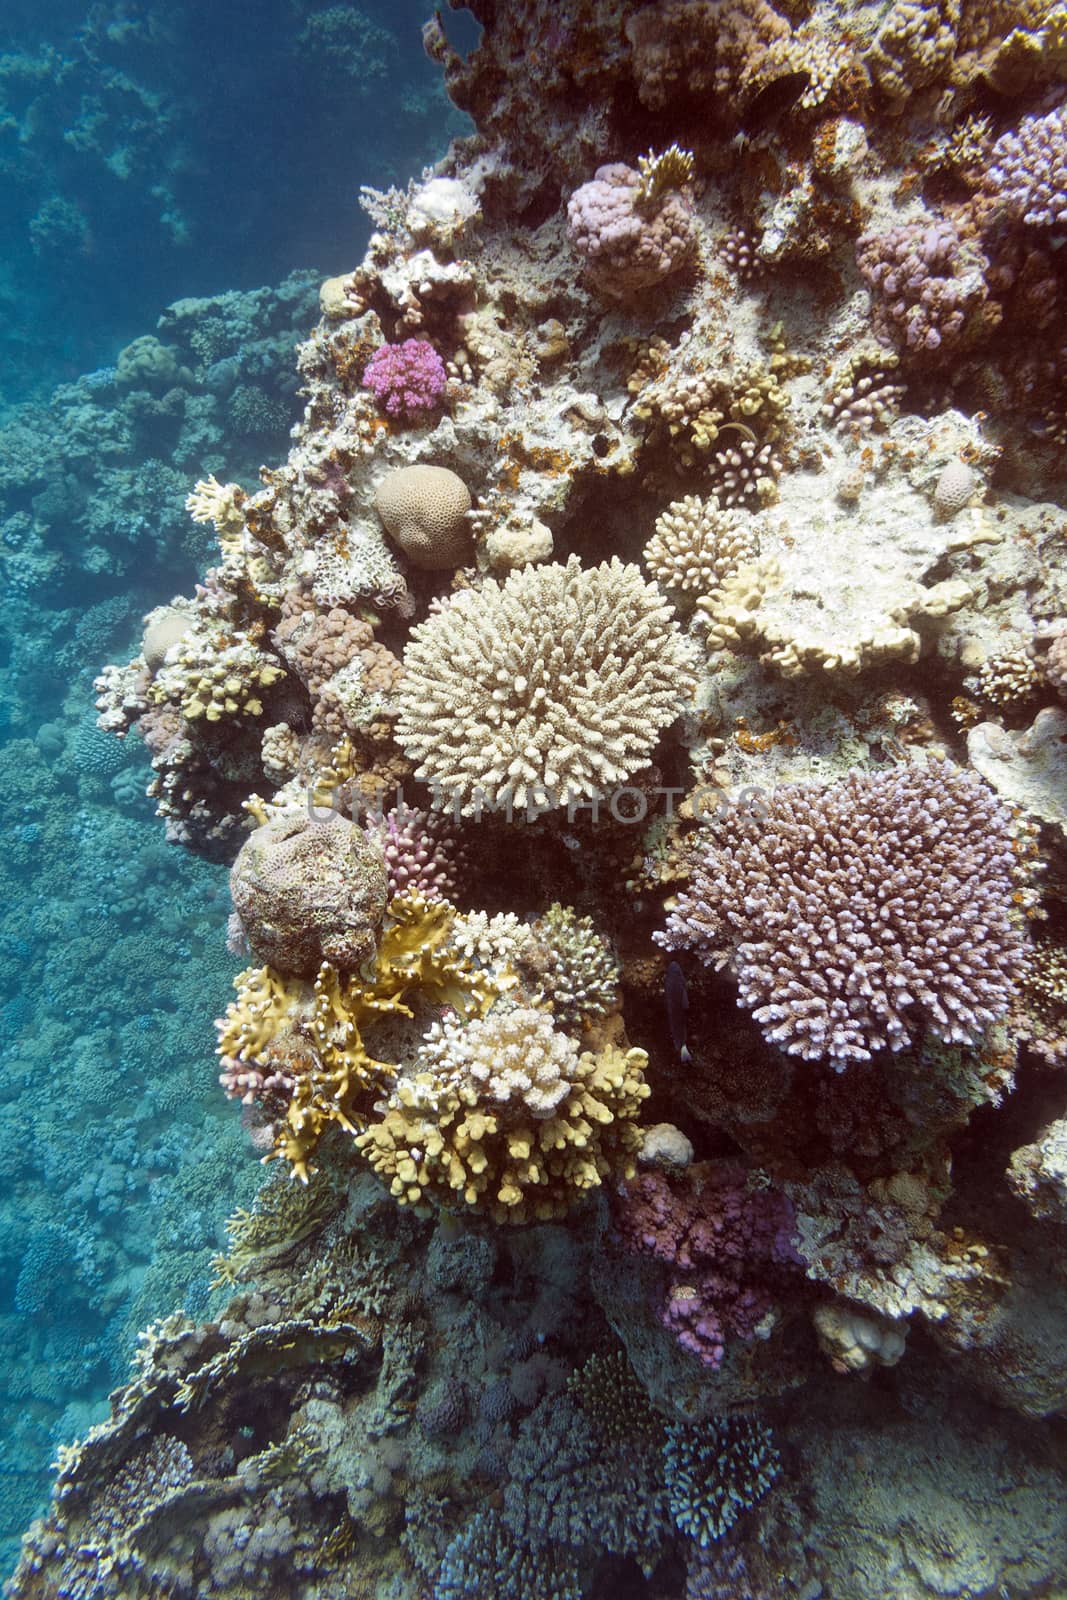  coral reef with hard corals in tropical sea, underwater by mychadre77